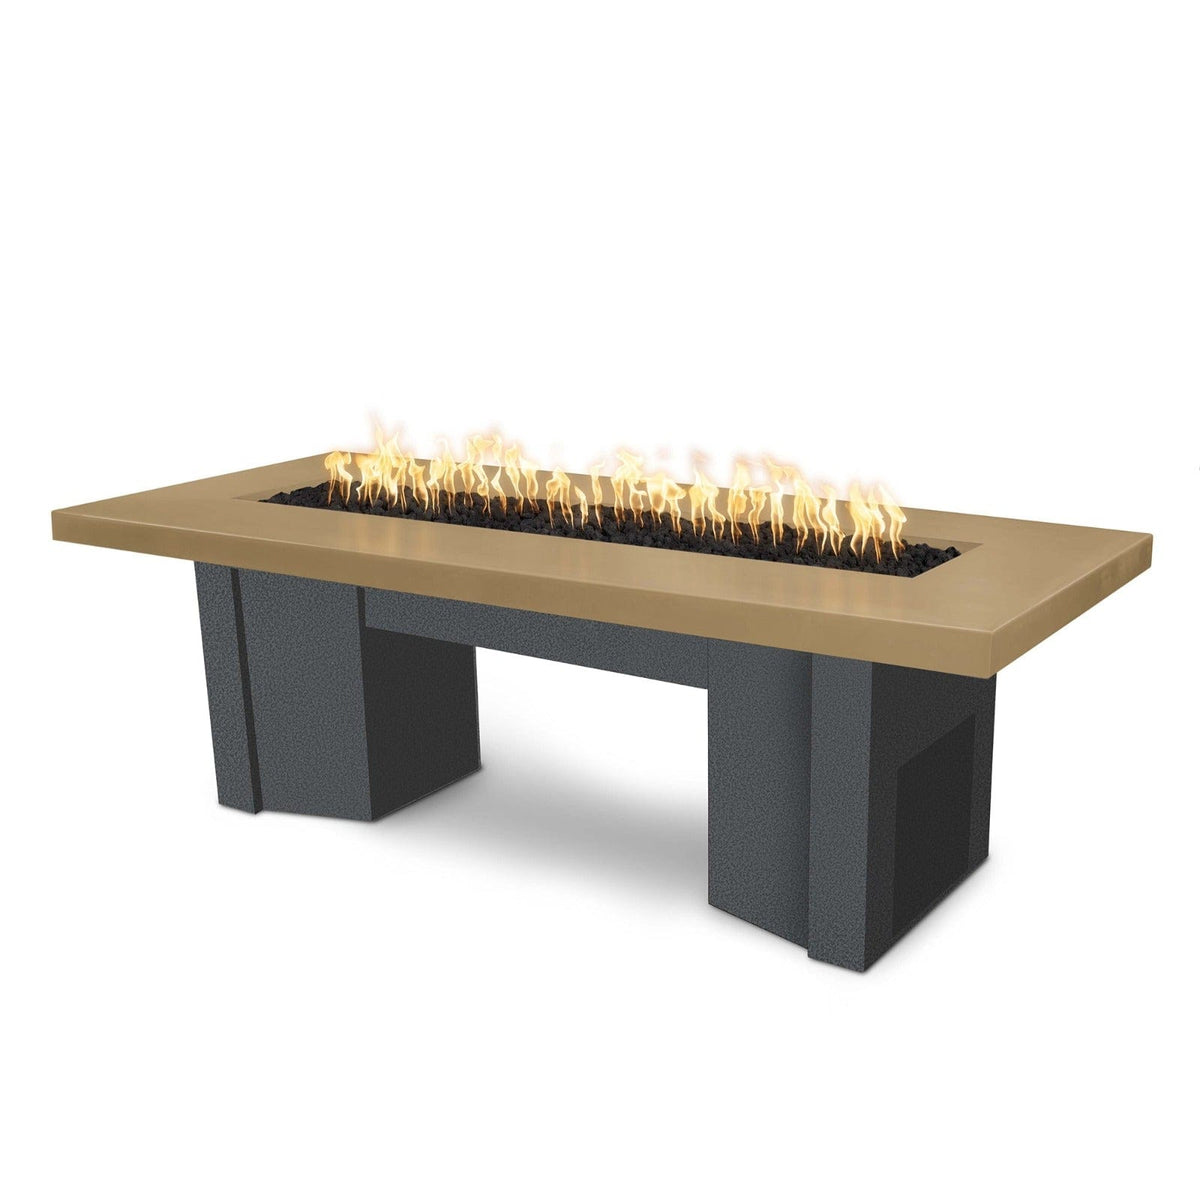 The Outdoor Plus Fire Features Brown (-BRN) / Silver Vein Powder Coated Steel (-SLV) The Outdoor Plus 78&quot; Alameda Fire Table Smooth Concrete in Natural Gas - Flame Sense System with Push Button Spark Igniter / OPT-ALMGFRC78FSEN-NG